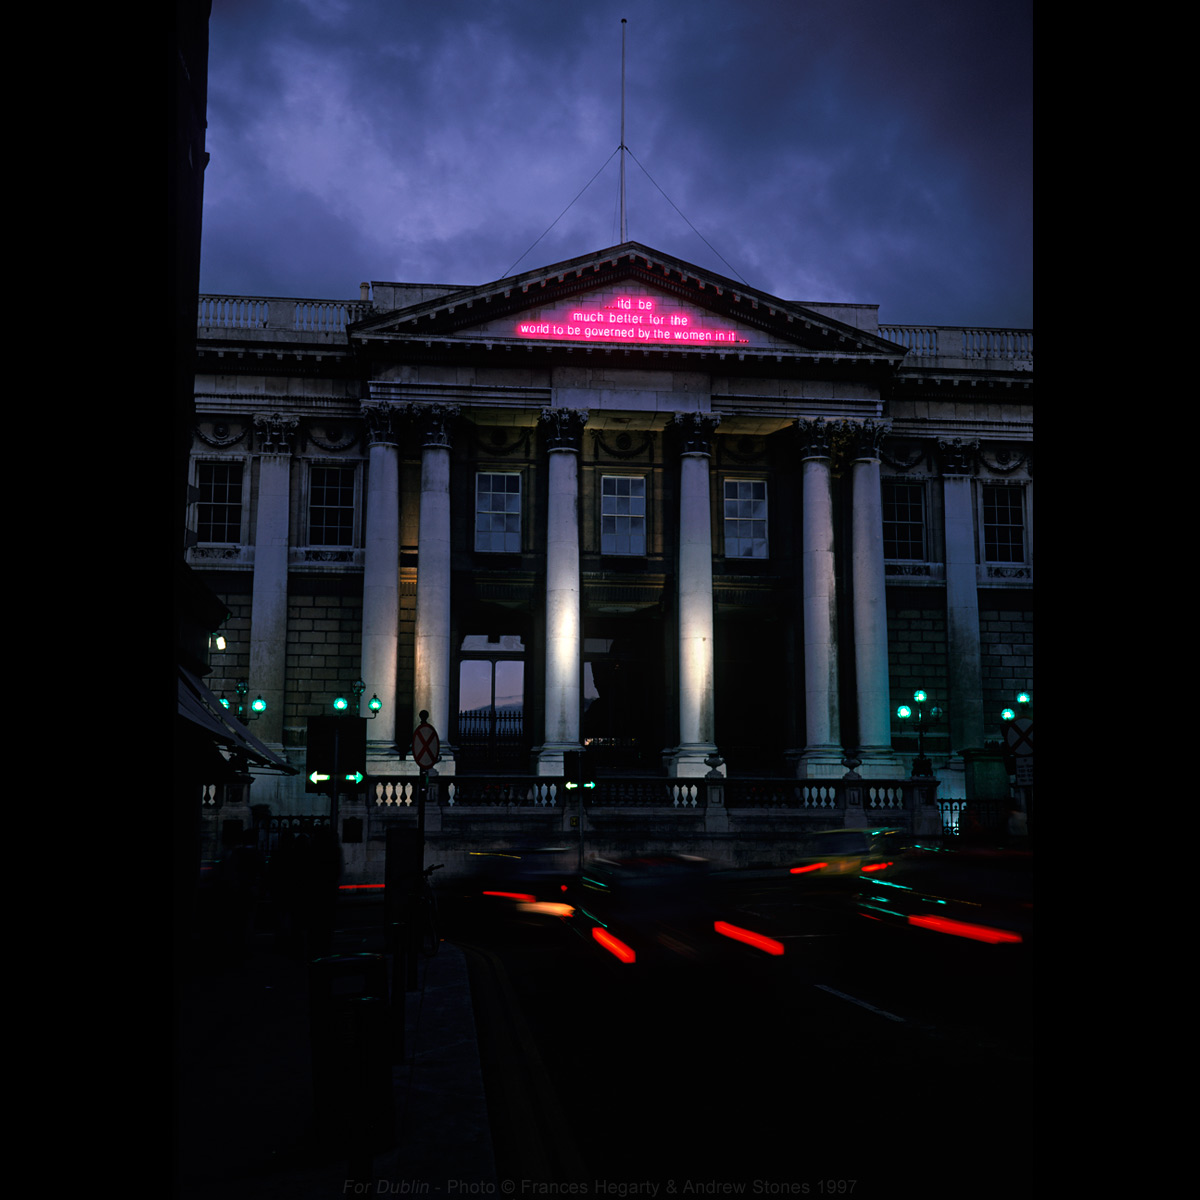 Hegarty & Stones - 'For Dublin' 1997 - nine manifestations in neon of James Joyce's Molly Bloom. View 2 of 14, City Hall, Parliament Street